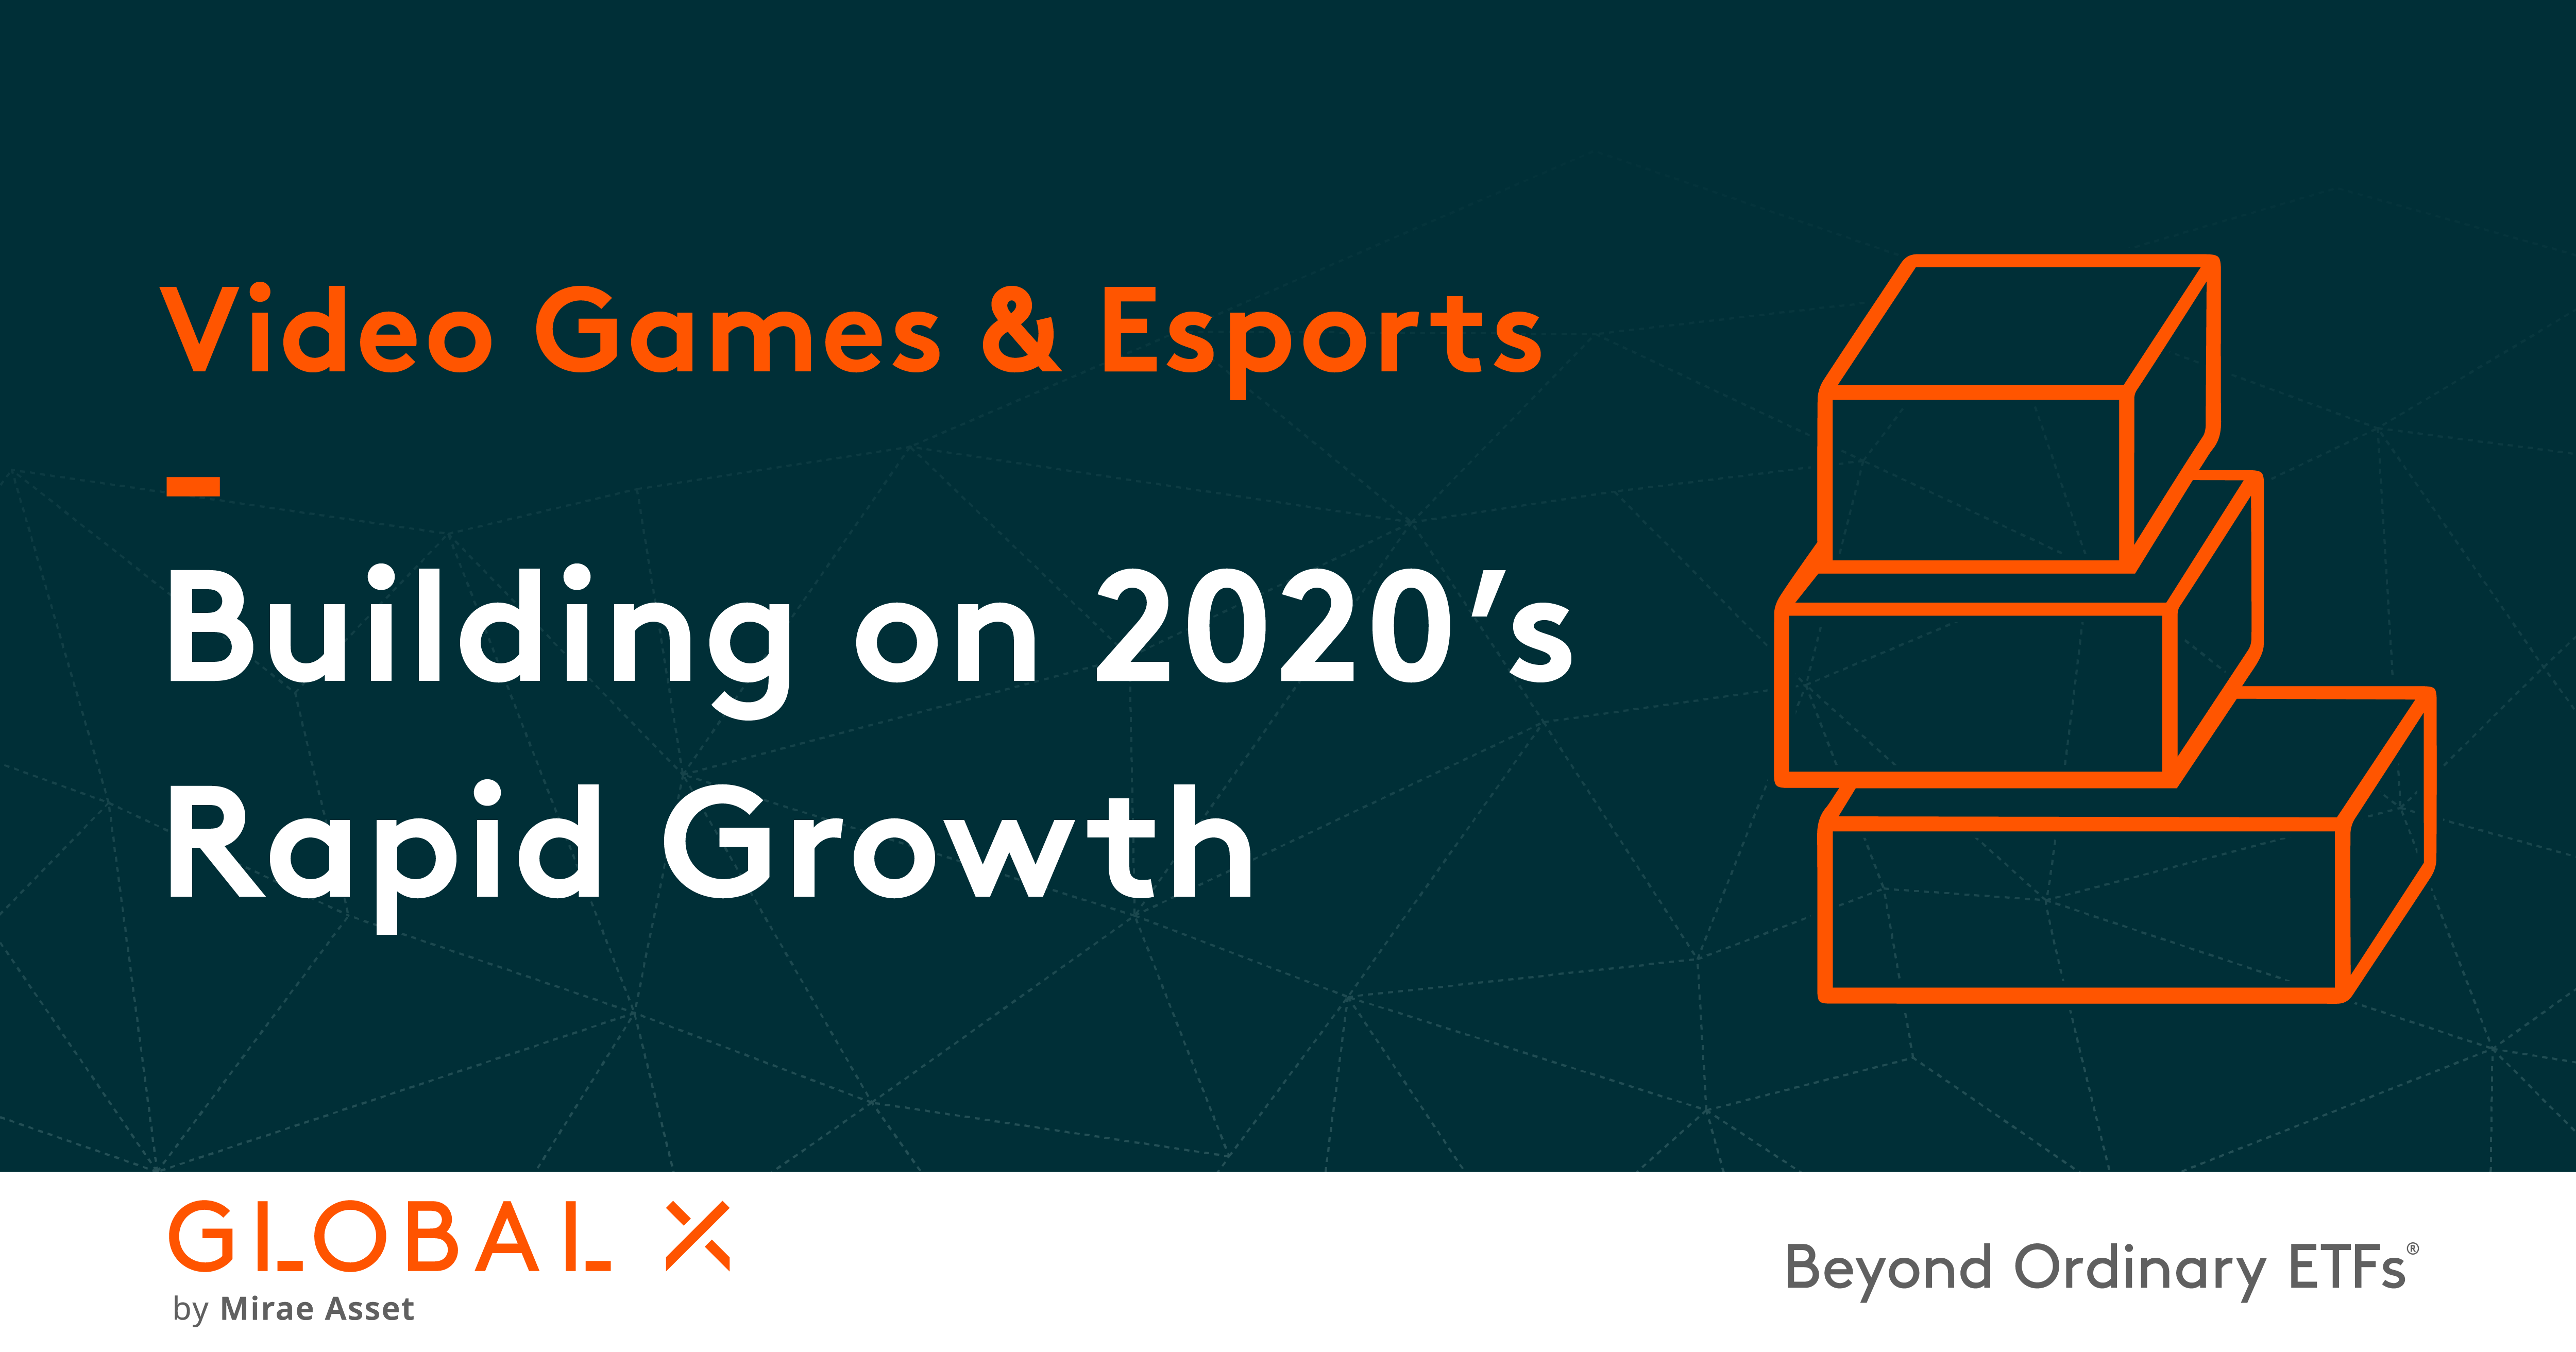 Google and Newzoo – Beyond 2021: Where Does Gaming Go Next?